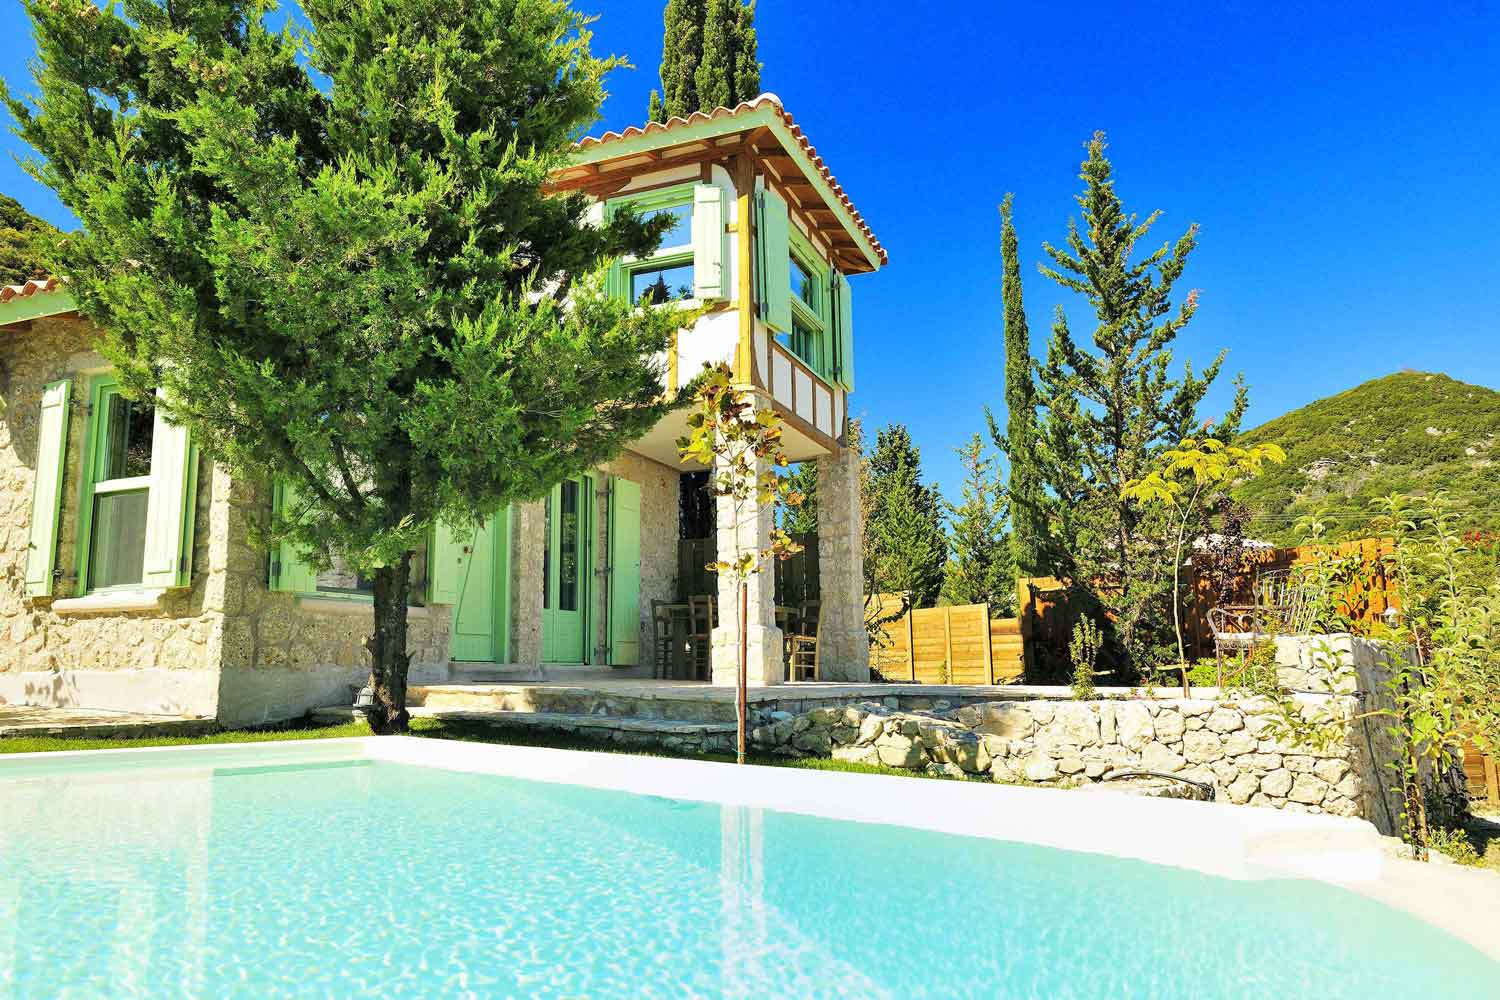 private pool villa in Greece, perfect vacations at your villa